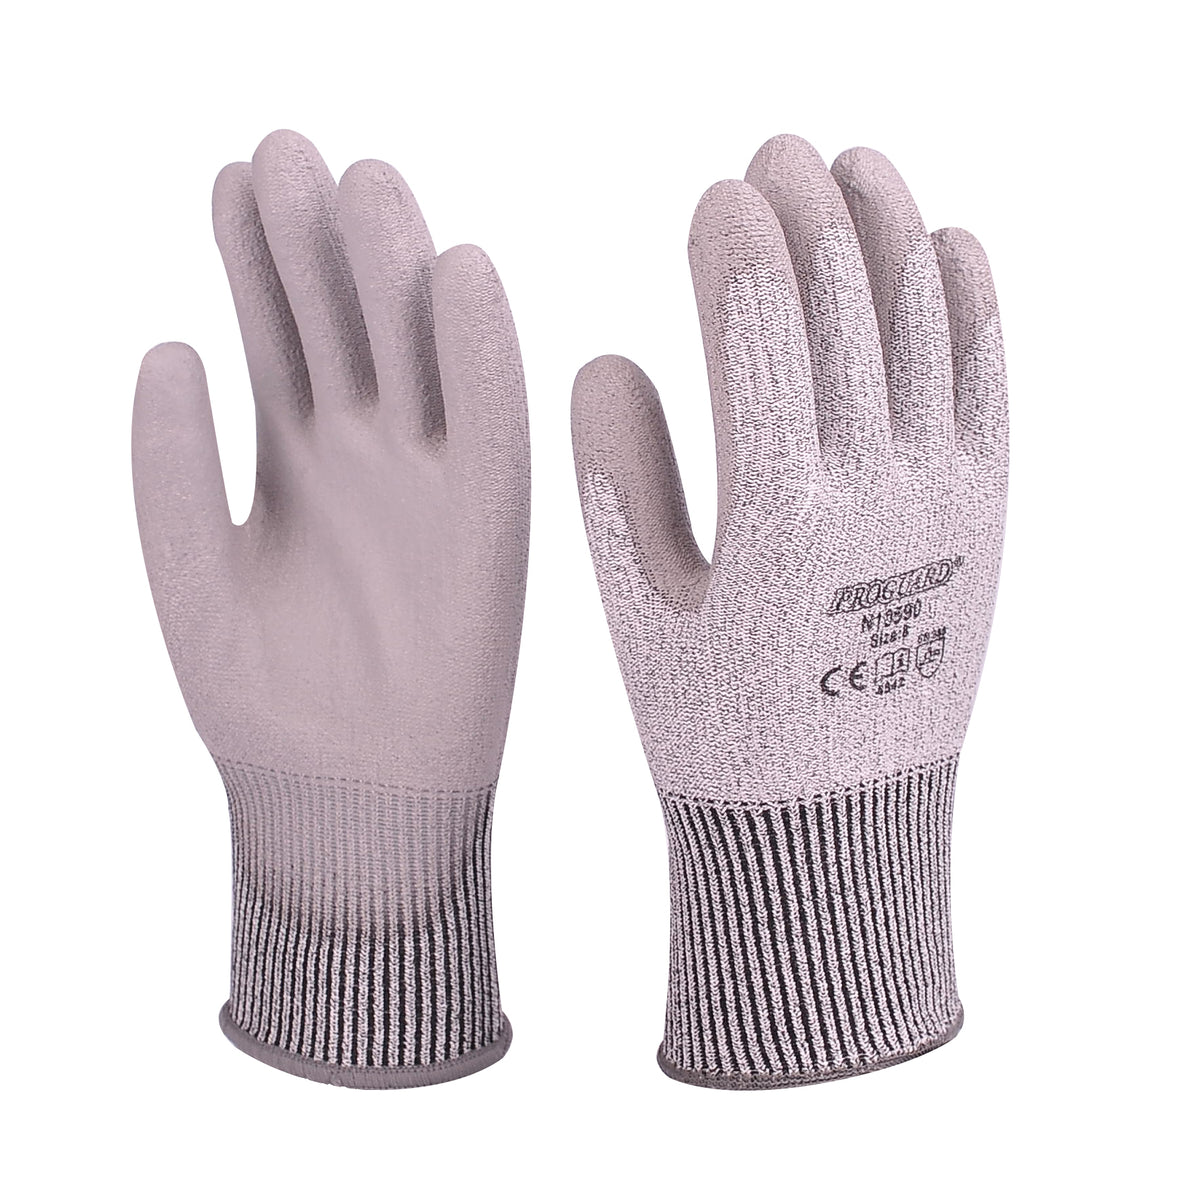 x5 Safety Gloves Polyester Latex Hand Protection 